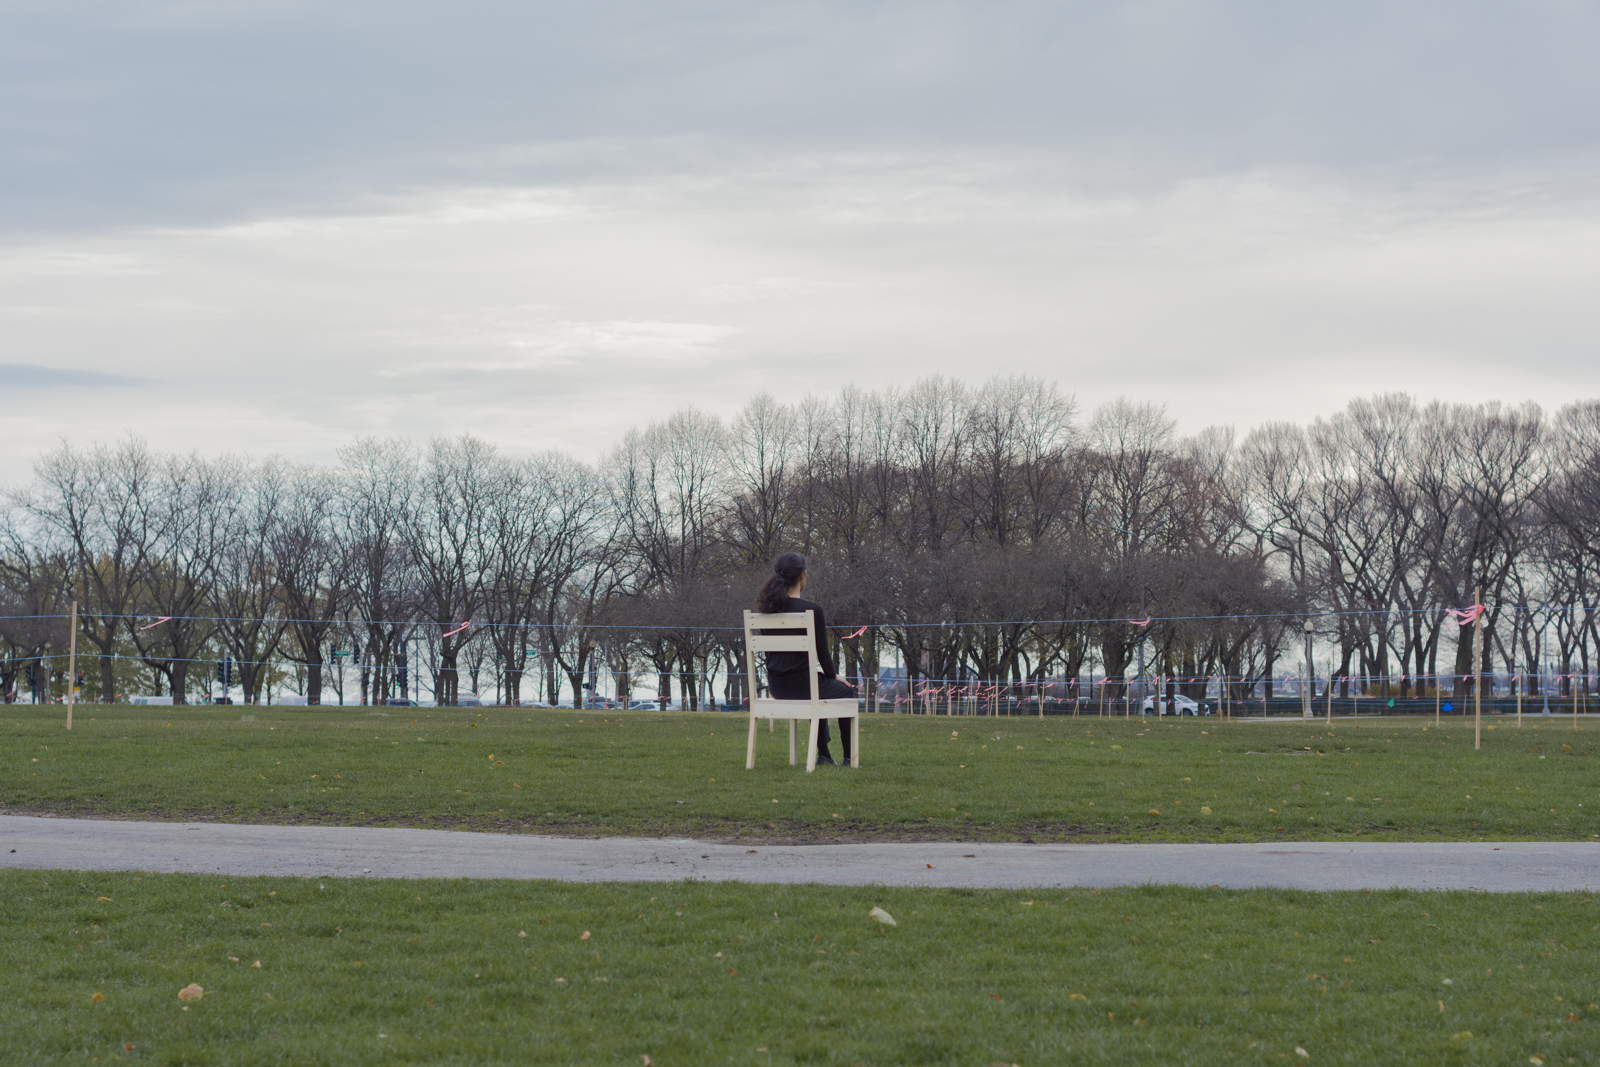 The artist is photographed from a distance wearing all black and seated on a wooden chair. Their face looks away from the camera. They are facing south. They are seated within a grassy park.